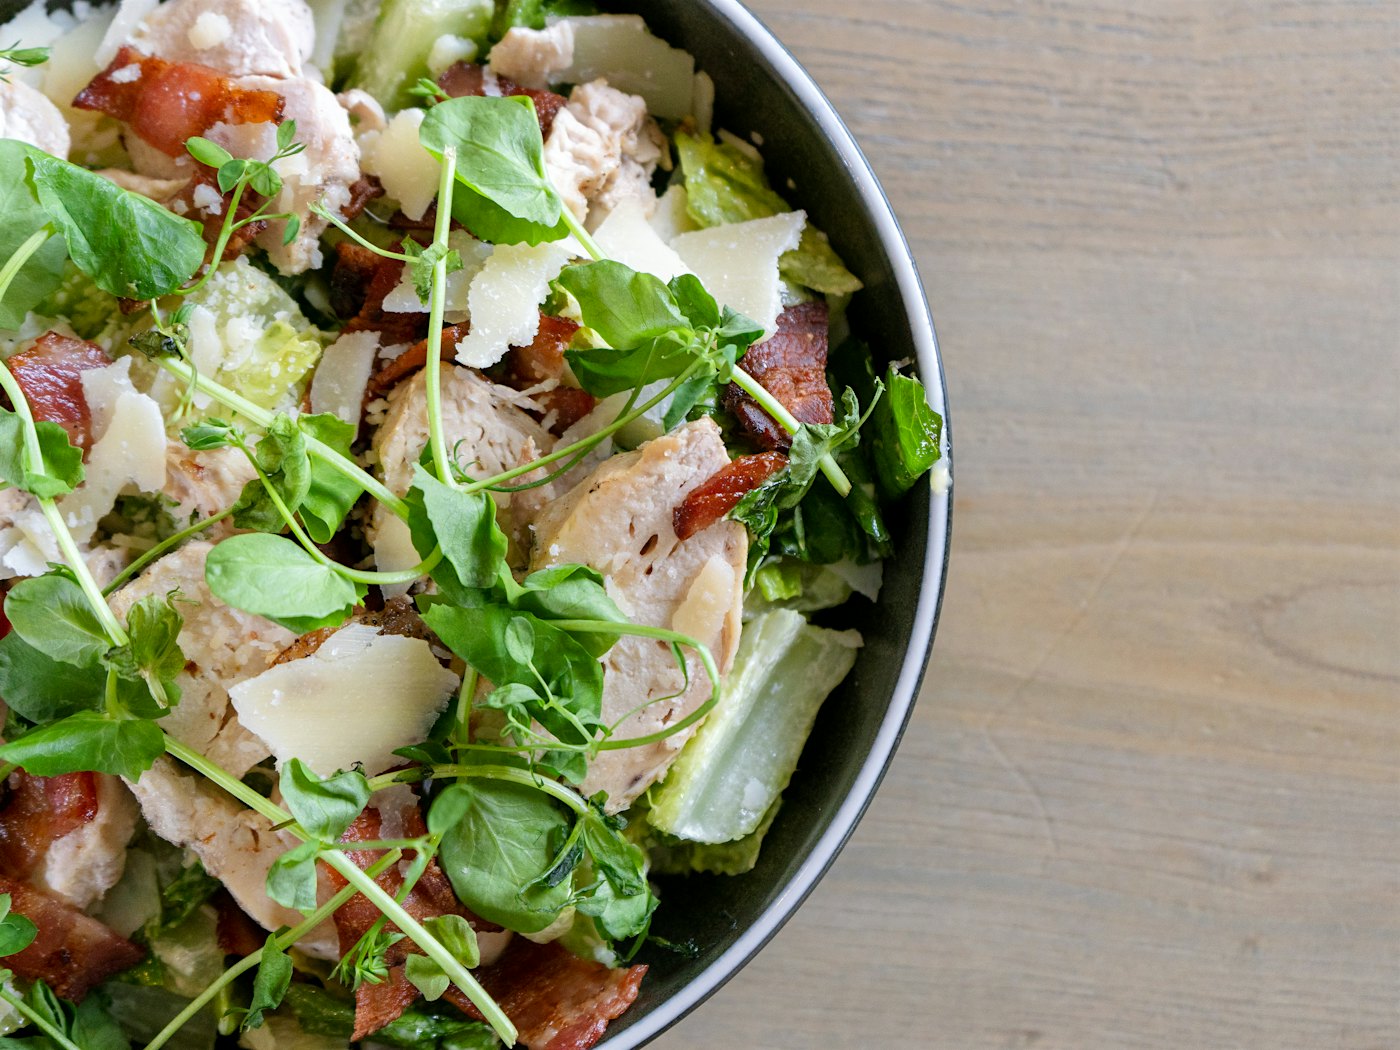 A plate of caesar salad, with chicken fillet, bacon, parmesan and lettuce. Photo